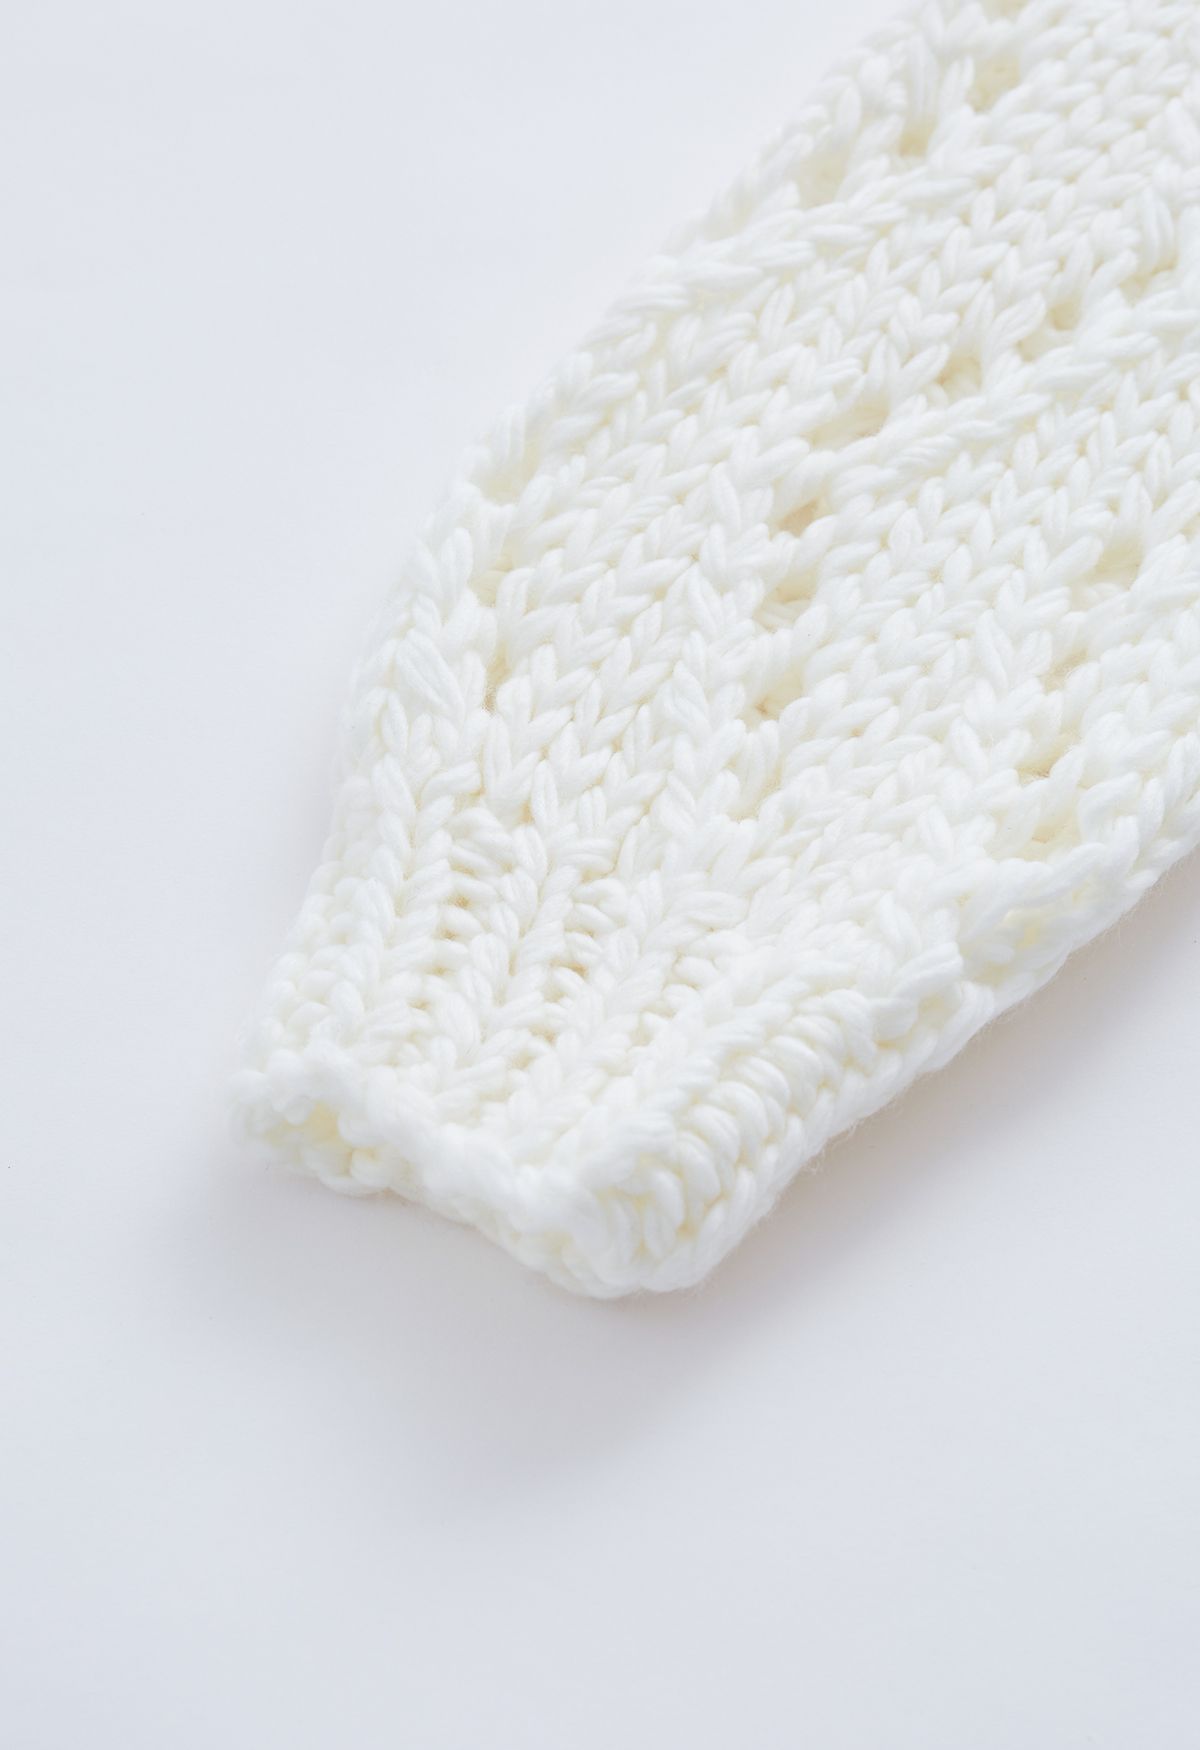 Pointelle Sleeve High Neck Hand-Knit Sweater in White